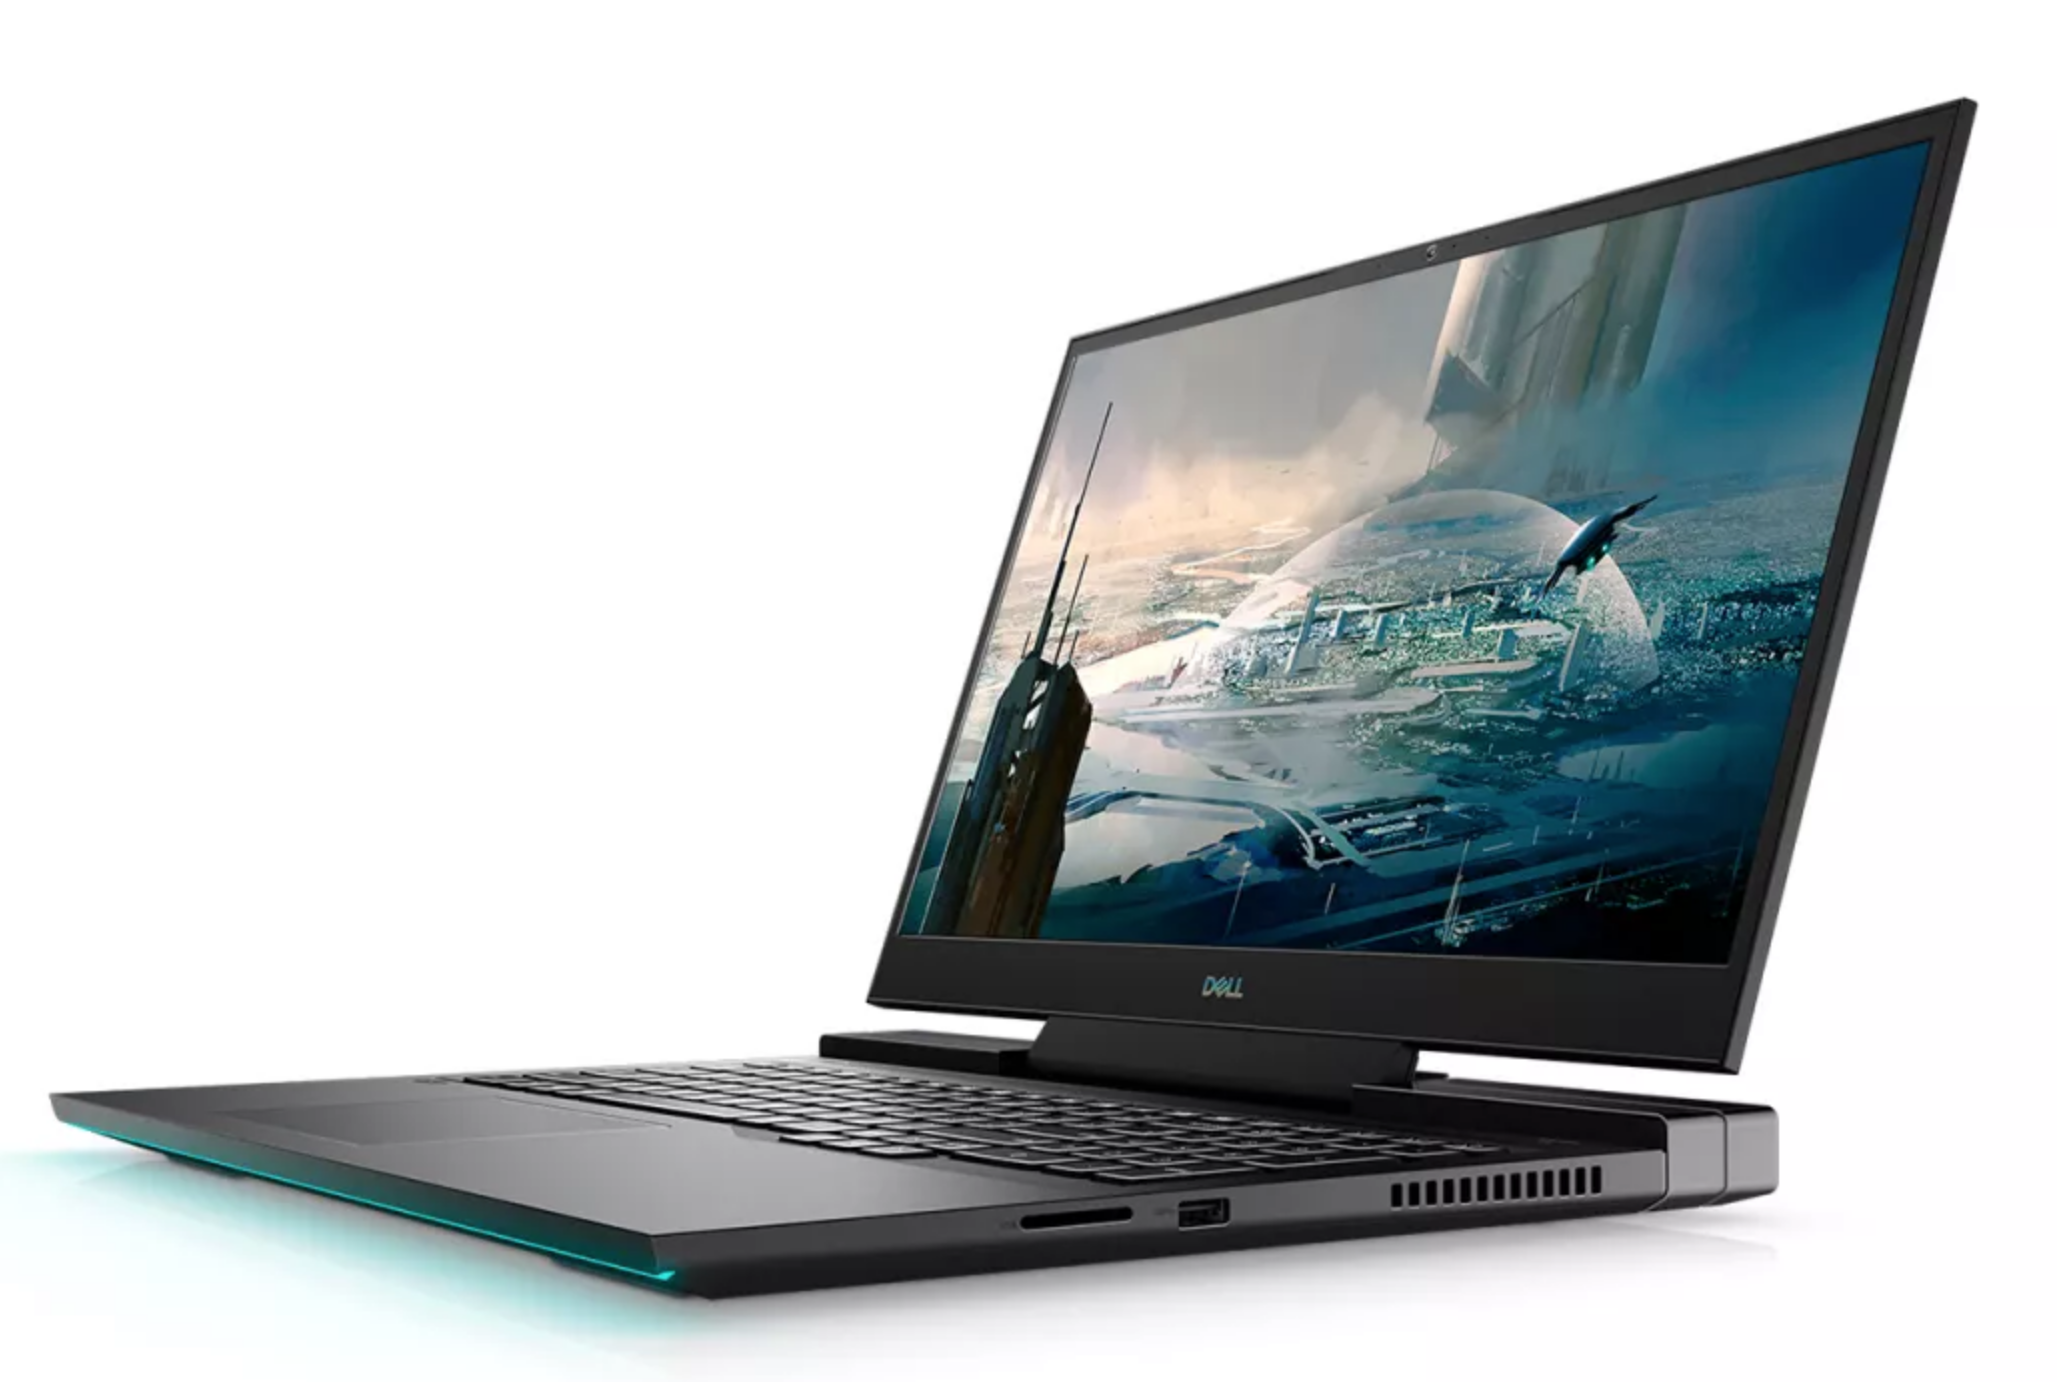 Top Dell Laptop - Dell G7 17